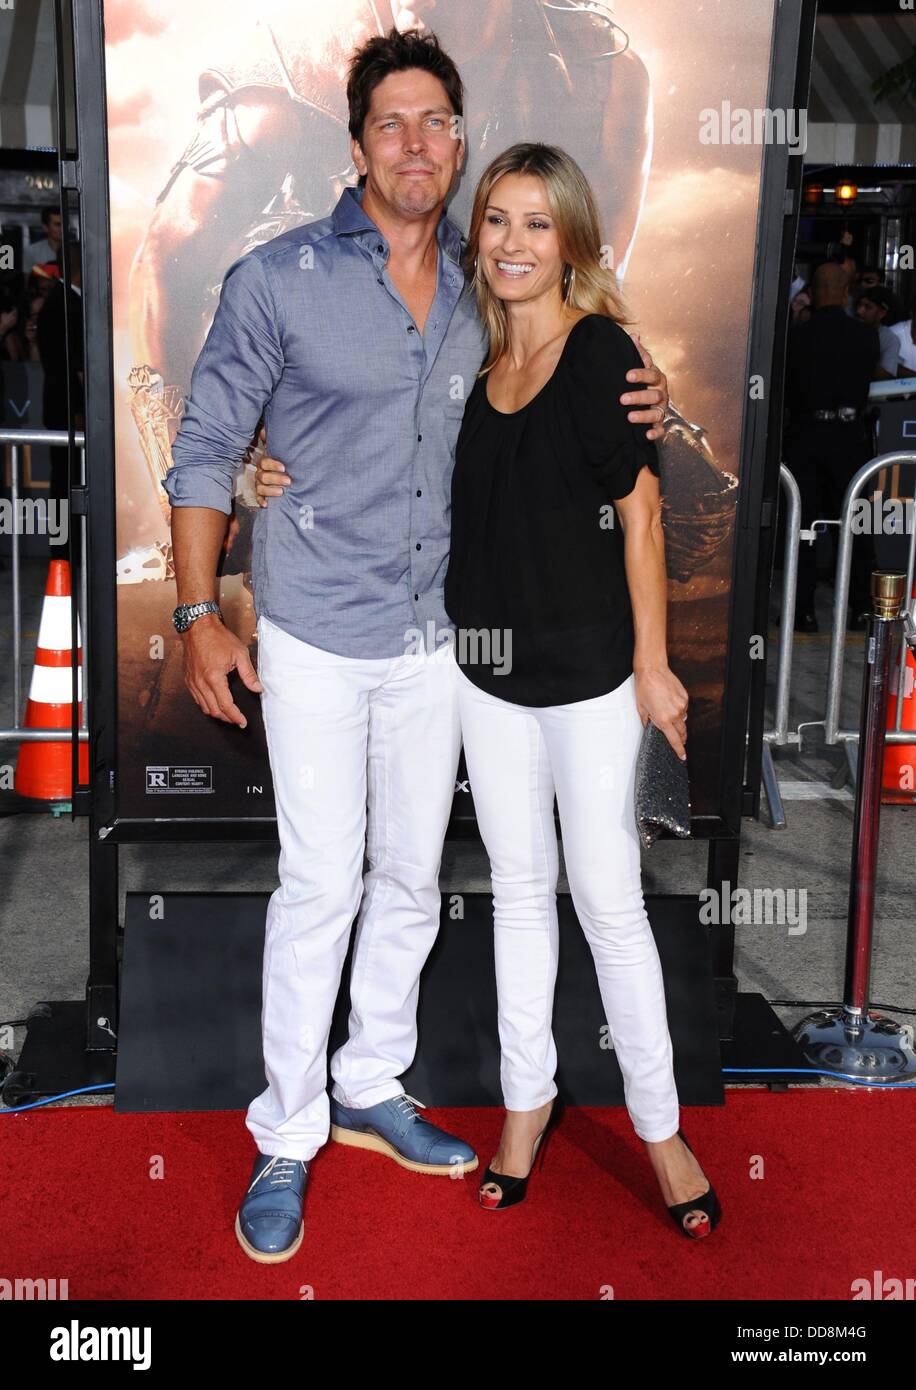 Los Angeles, CA. 28th Aug, 2013. Michael Trucco, Sandra Hess at arrivals for RIDDICK Premiere, Regency Village Theatre in Westwood, Los Angeles, CA August 28, 2013. Credit:  Dee Cercone/Everett Collection/Alamy Live News Stock Photo